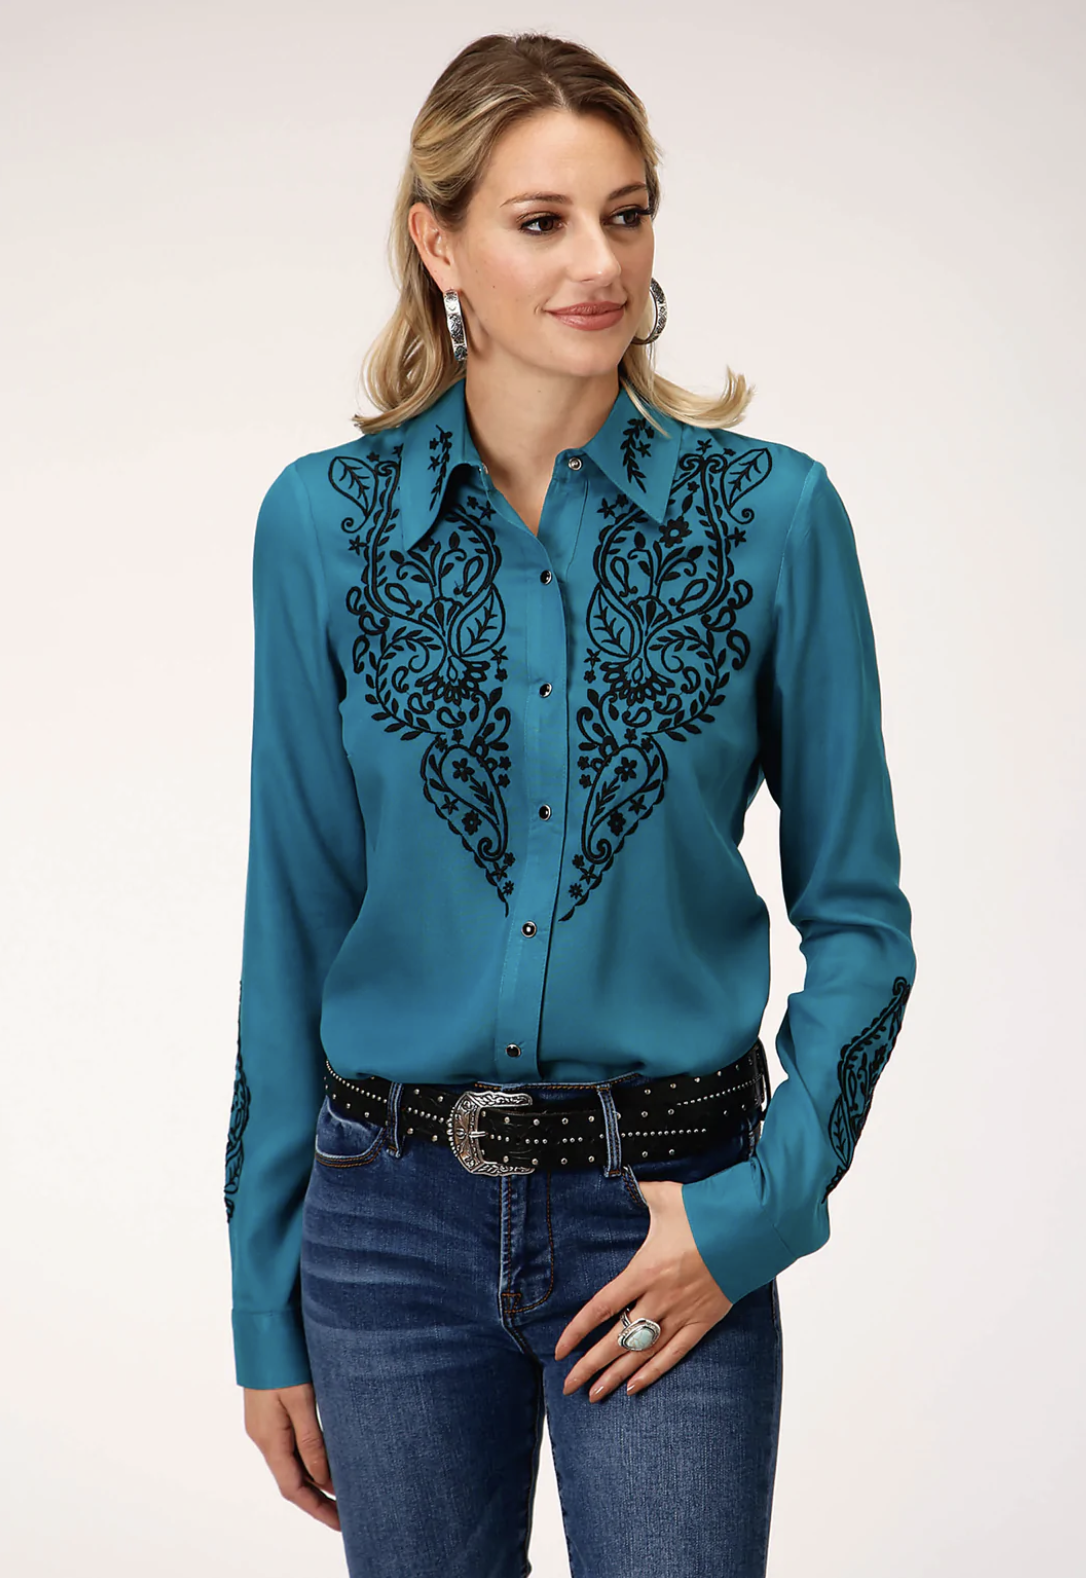 Roper Women's Shirt 'Studio West Collection' Long Sleeve With Floral ...